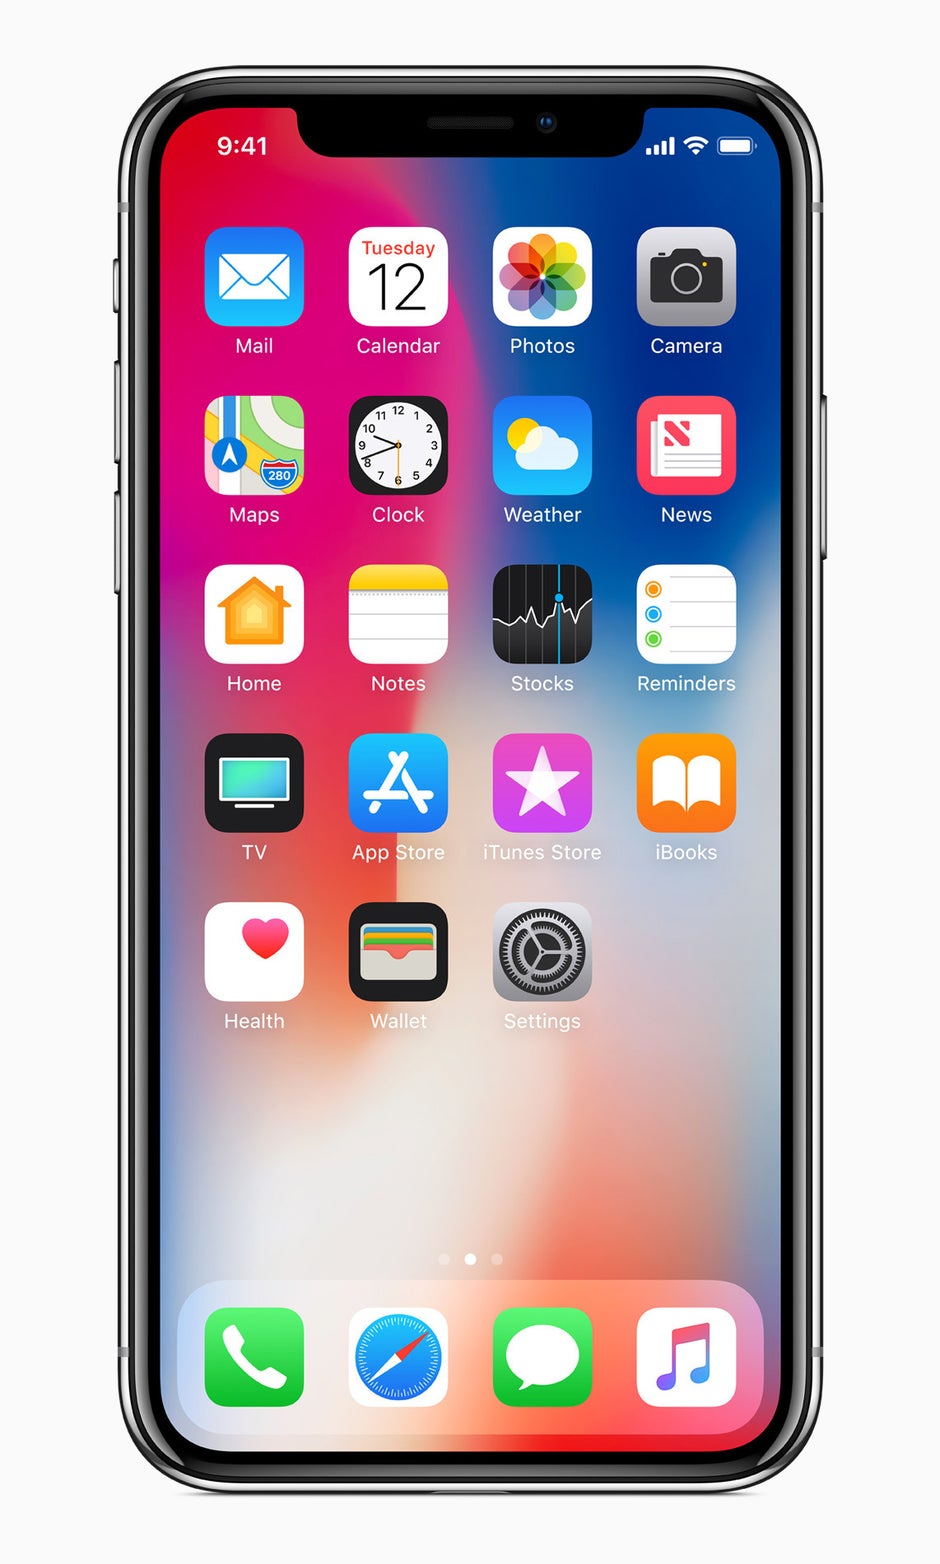 The iPhone X is Apple's first iPhone with an AMOLED display - Apple iPhone X is announced with stunning design, gorgeous display, Face ID, and $1000 price tag